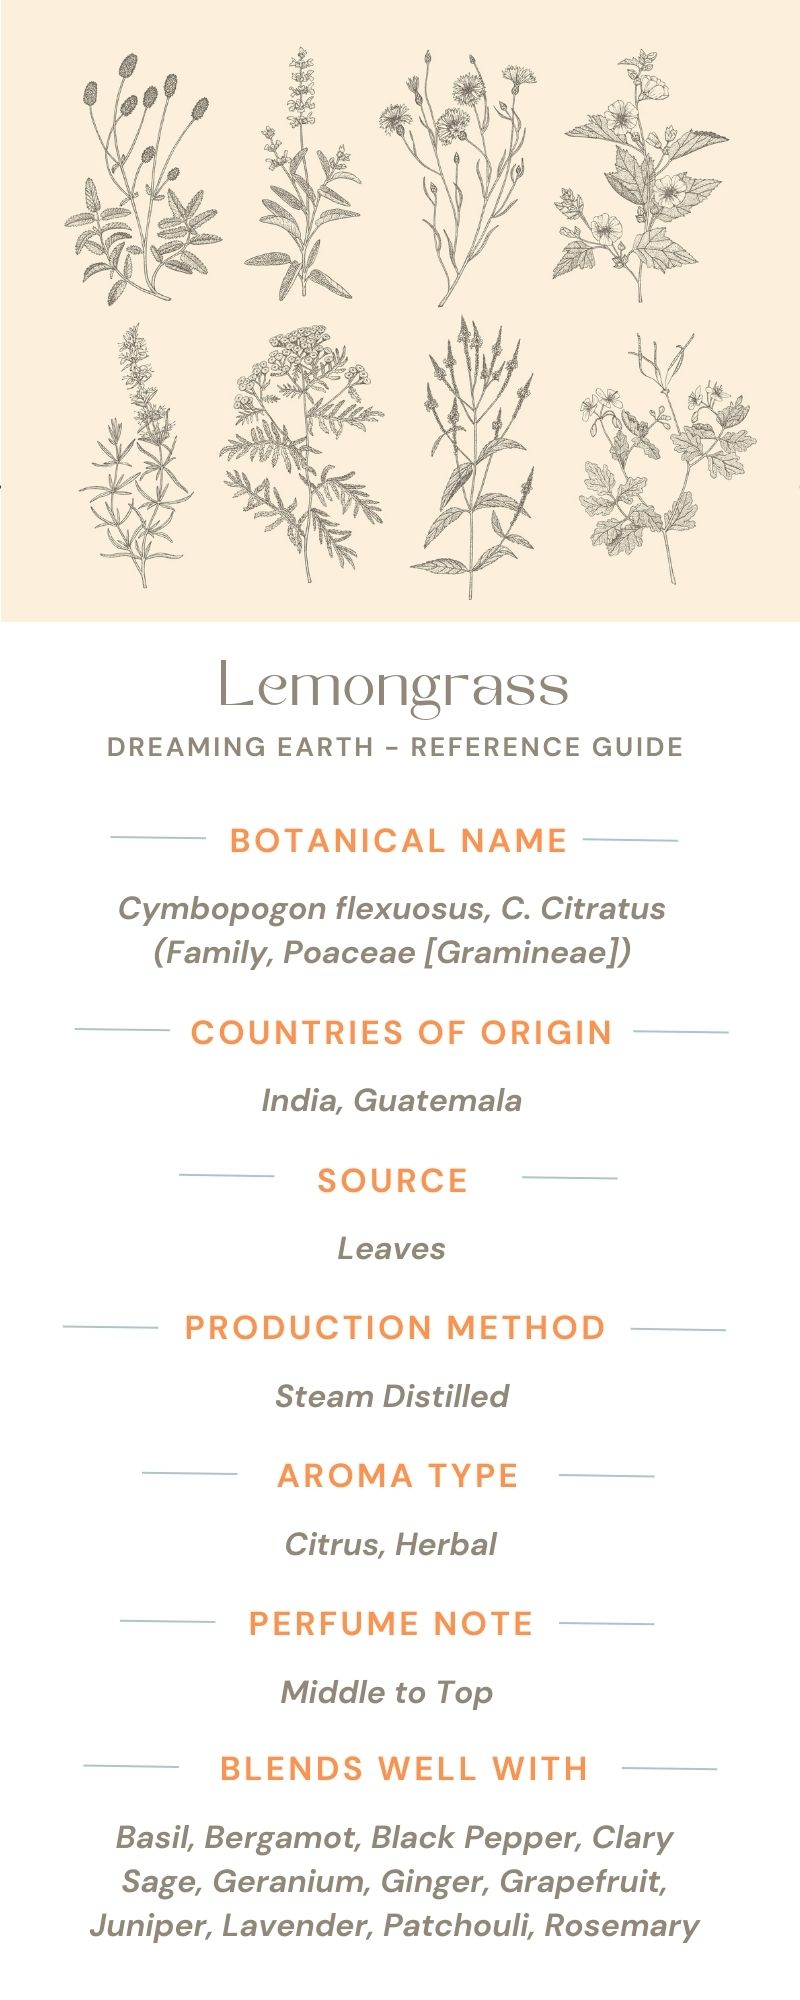 Load image into Gallery viewer, Lemongrass Organic Essential Oil - Dreaming Earth Inc
